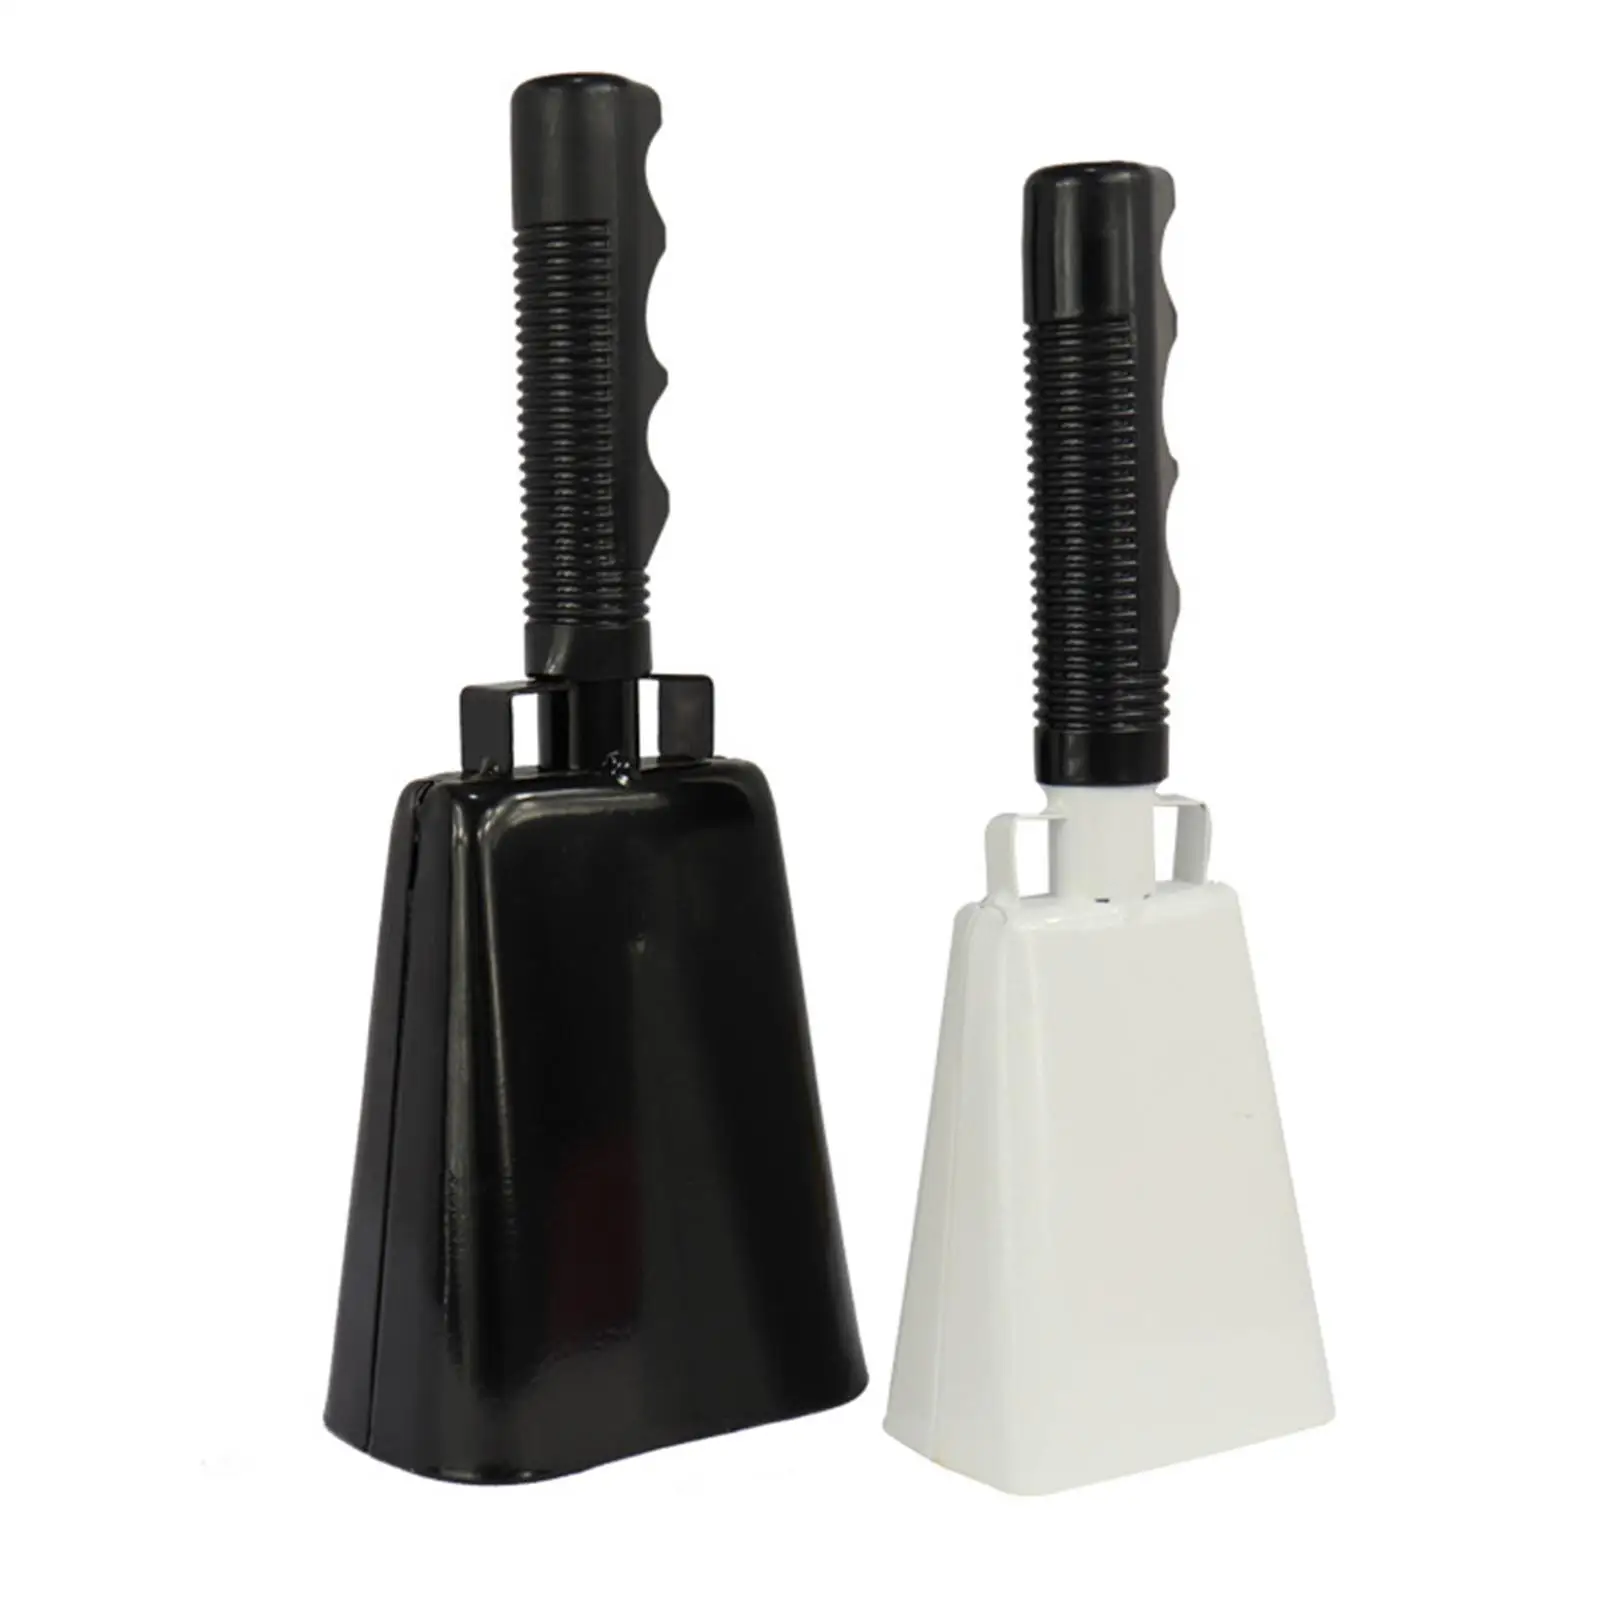 Musical Handbell Cheering Bell Metal Cowbell Percussion for Holiday Party